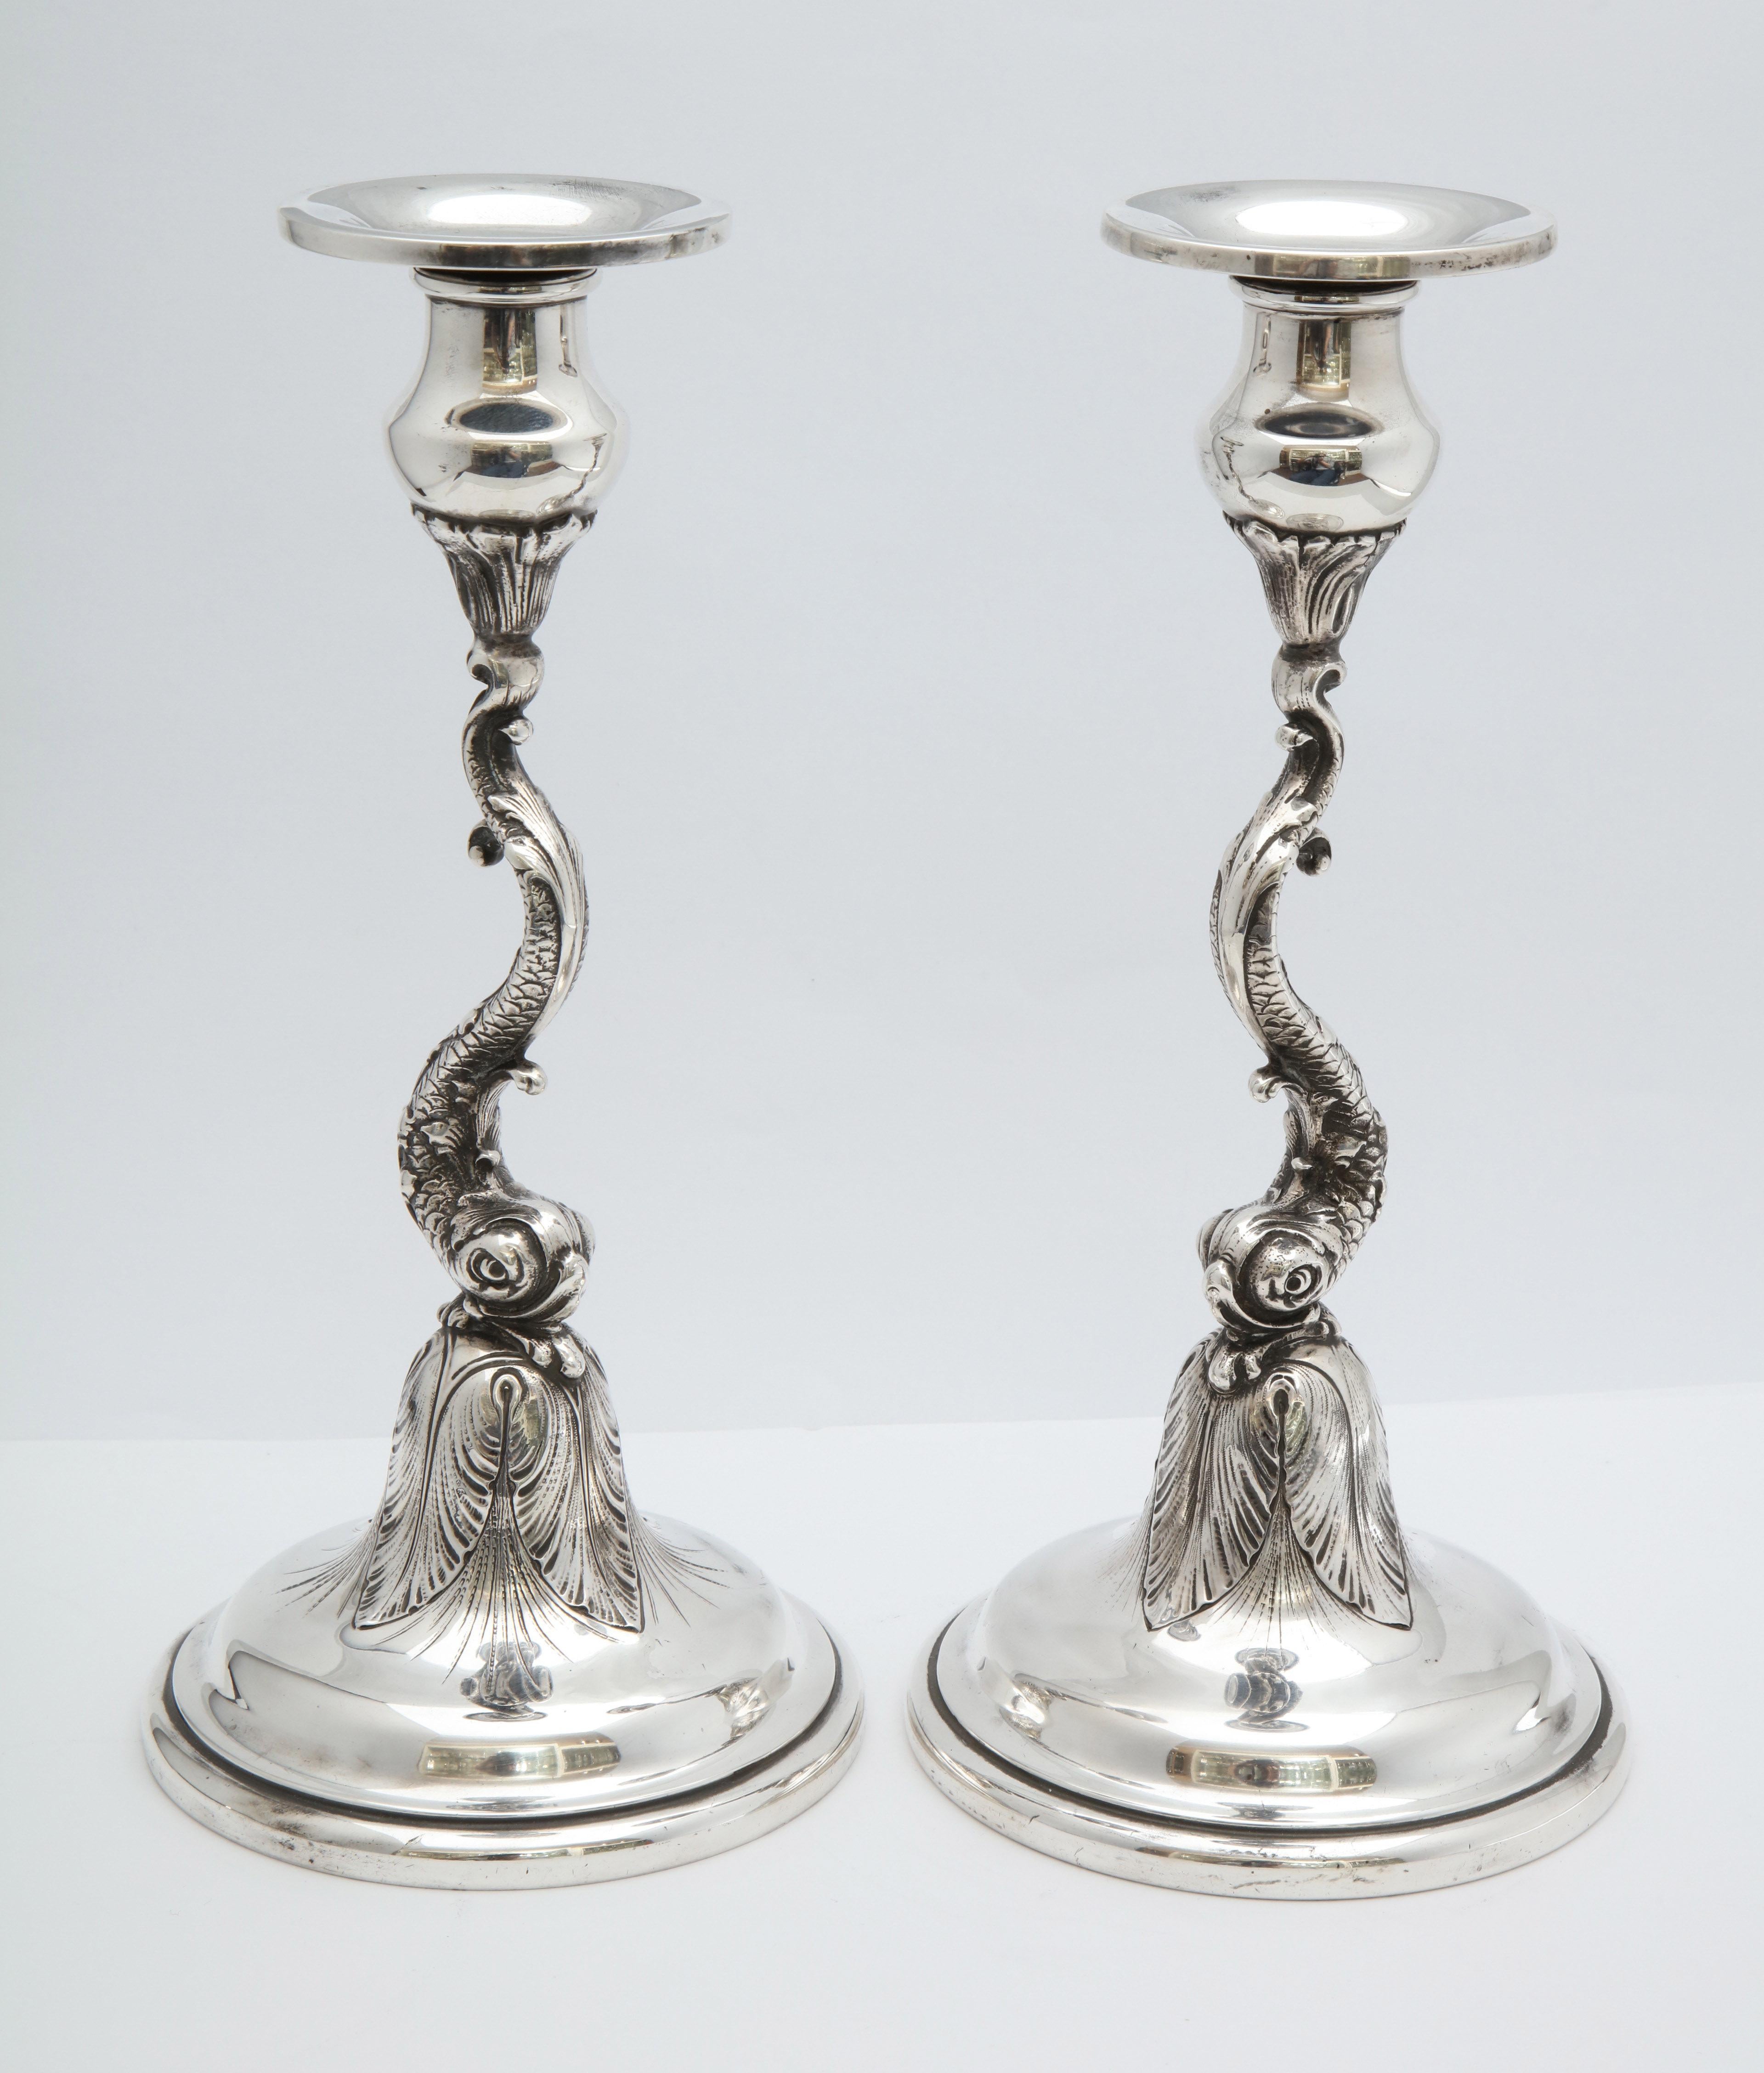 Pair of sterling silver, Art Nouveau, Dolphin-form candlesticks, made for The Spaulding Co., Chicago (by the Redlich Silver Co.) circa 1900. The stem of each candlestick is the full head and body of a dolphin. Weighted. Each candlestick measures 10